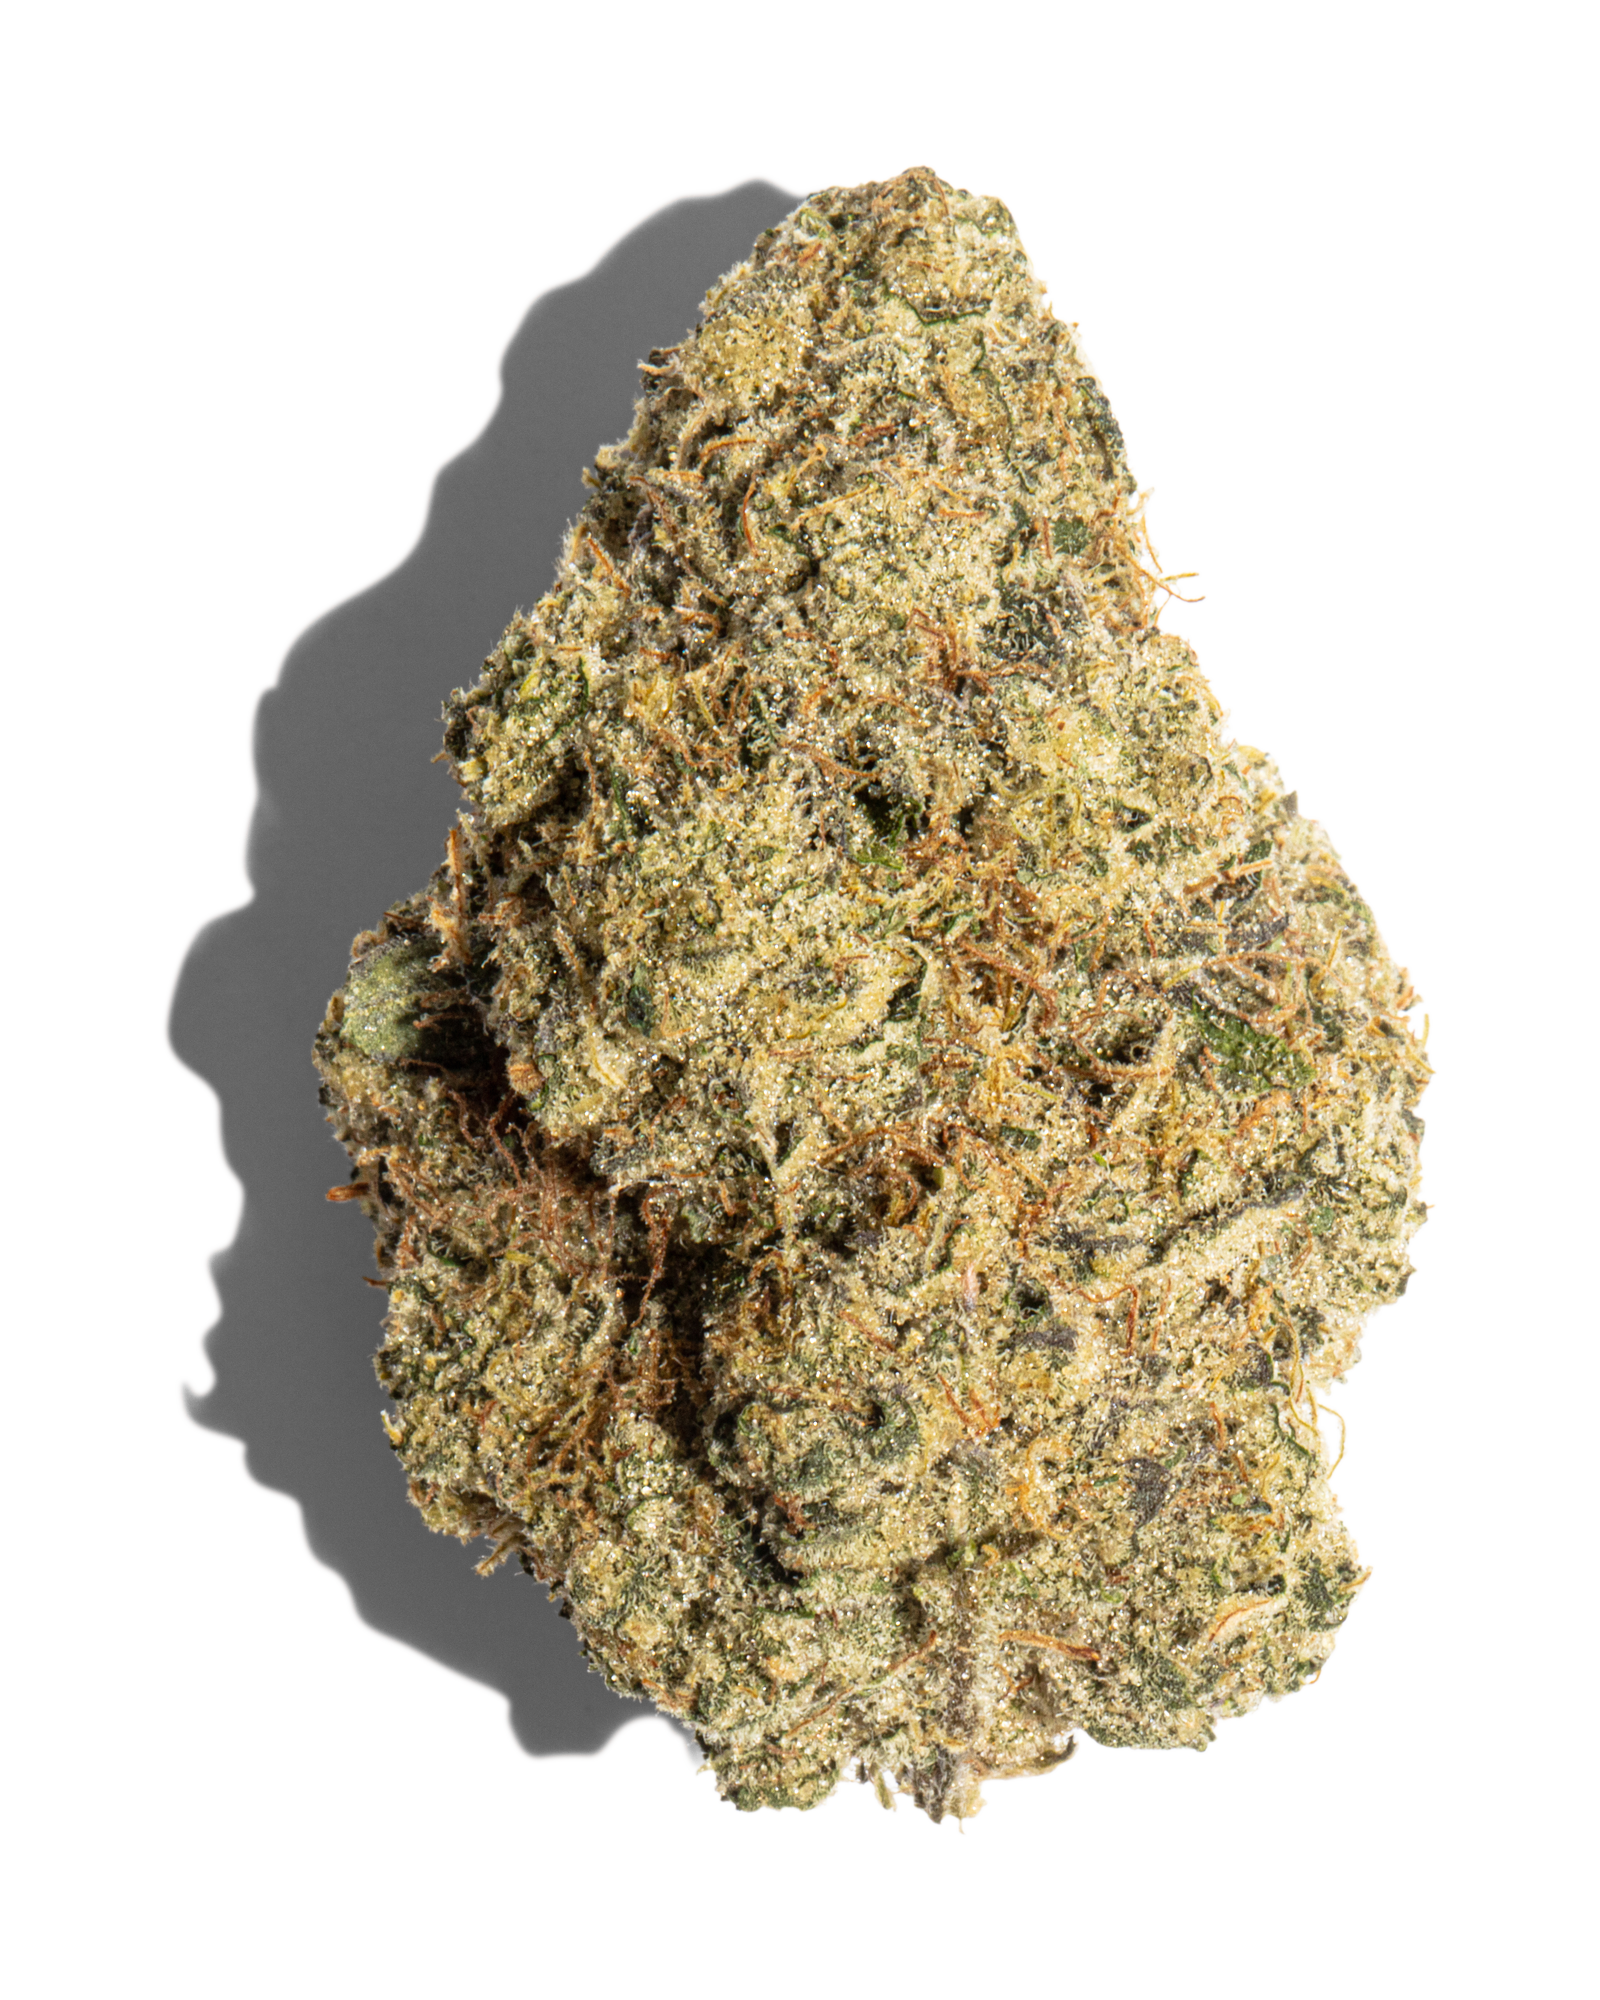 Strain Review: Purple Cake Batter by Richie Rich - The Highest Critic